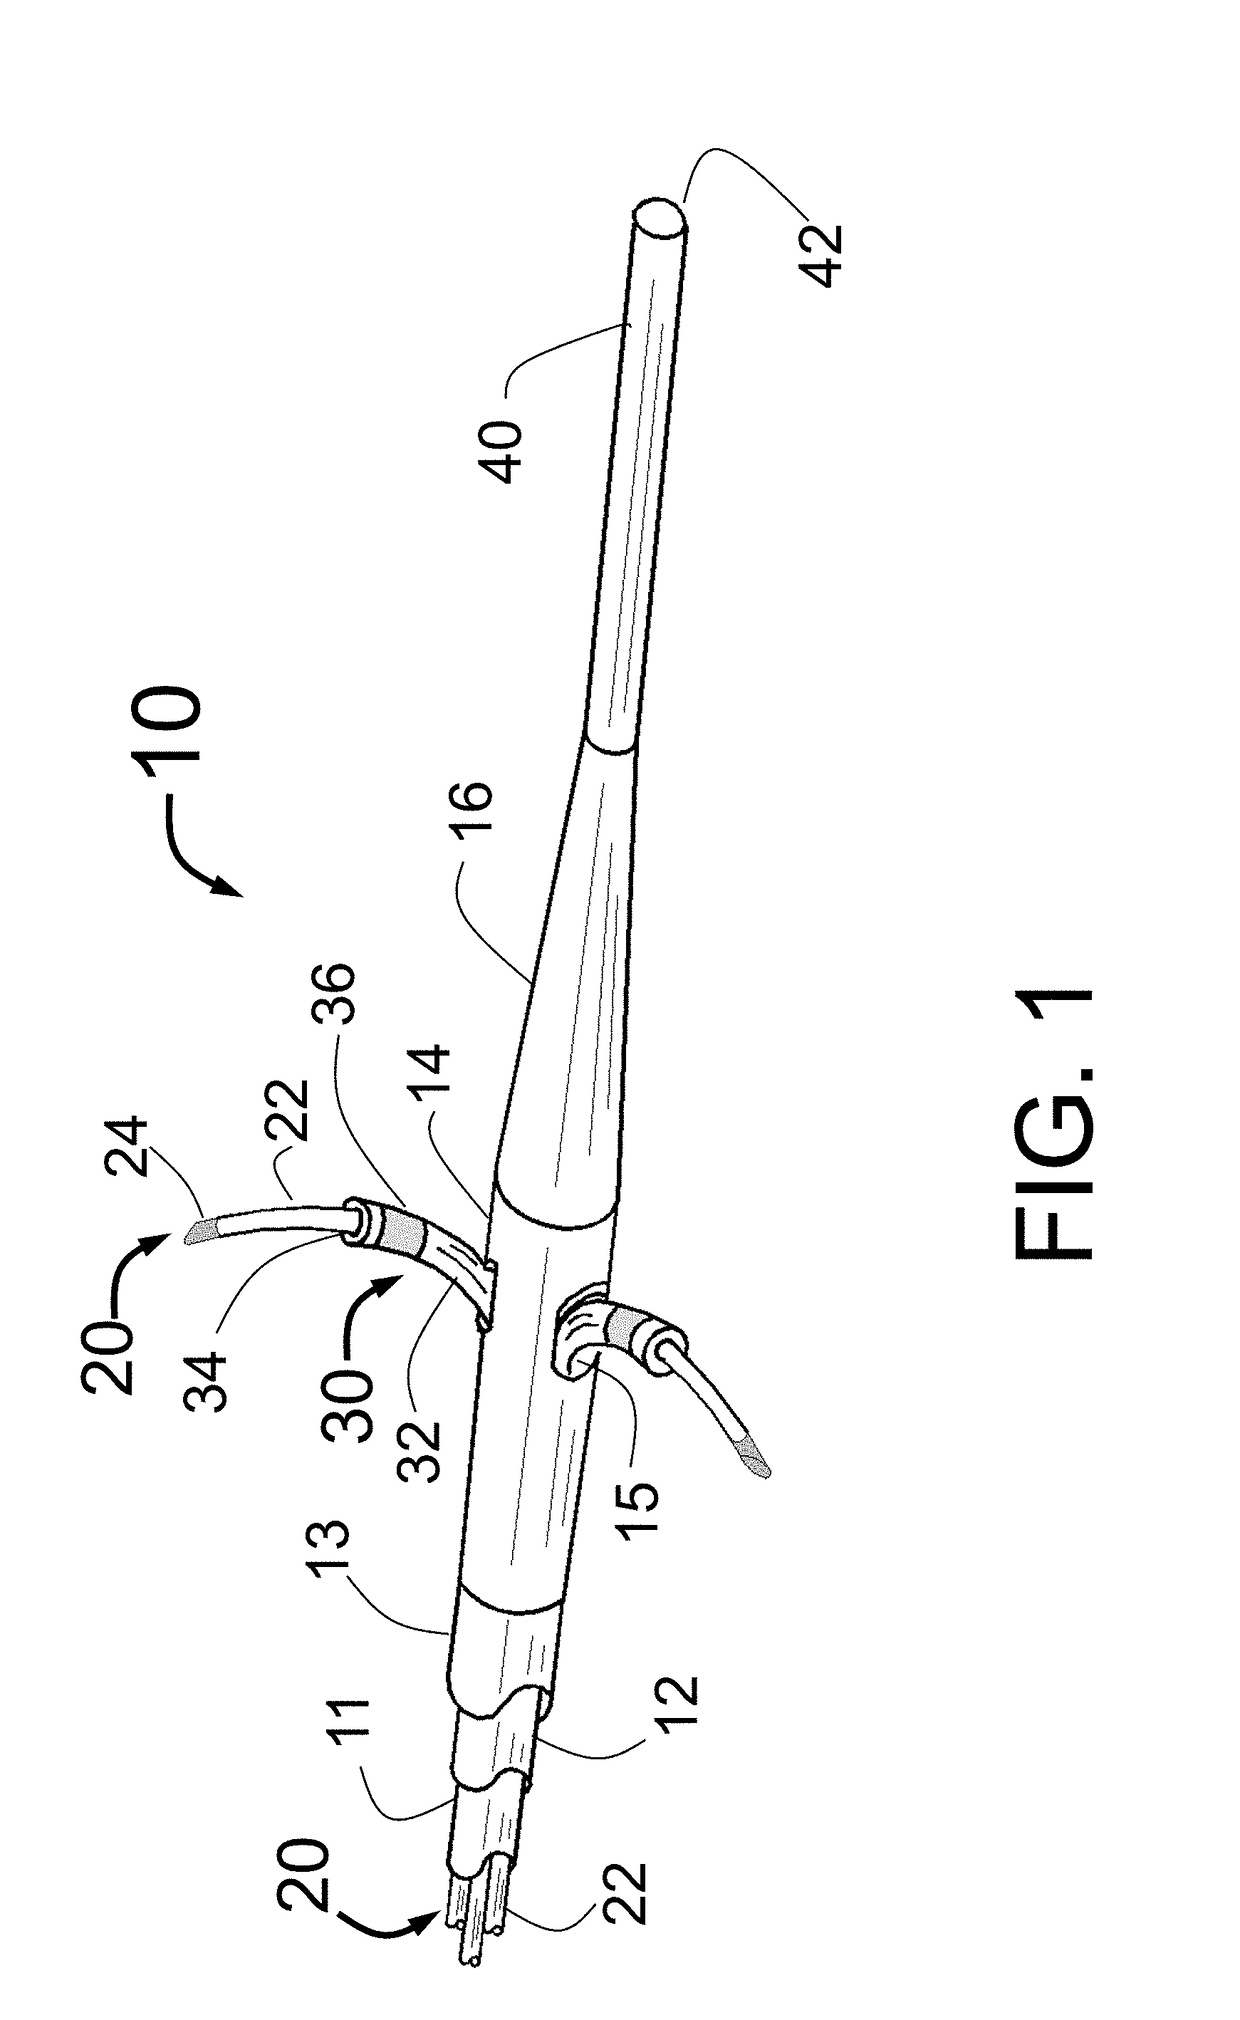 Apparatus for effective ablation and nerve sensing associated with denervation